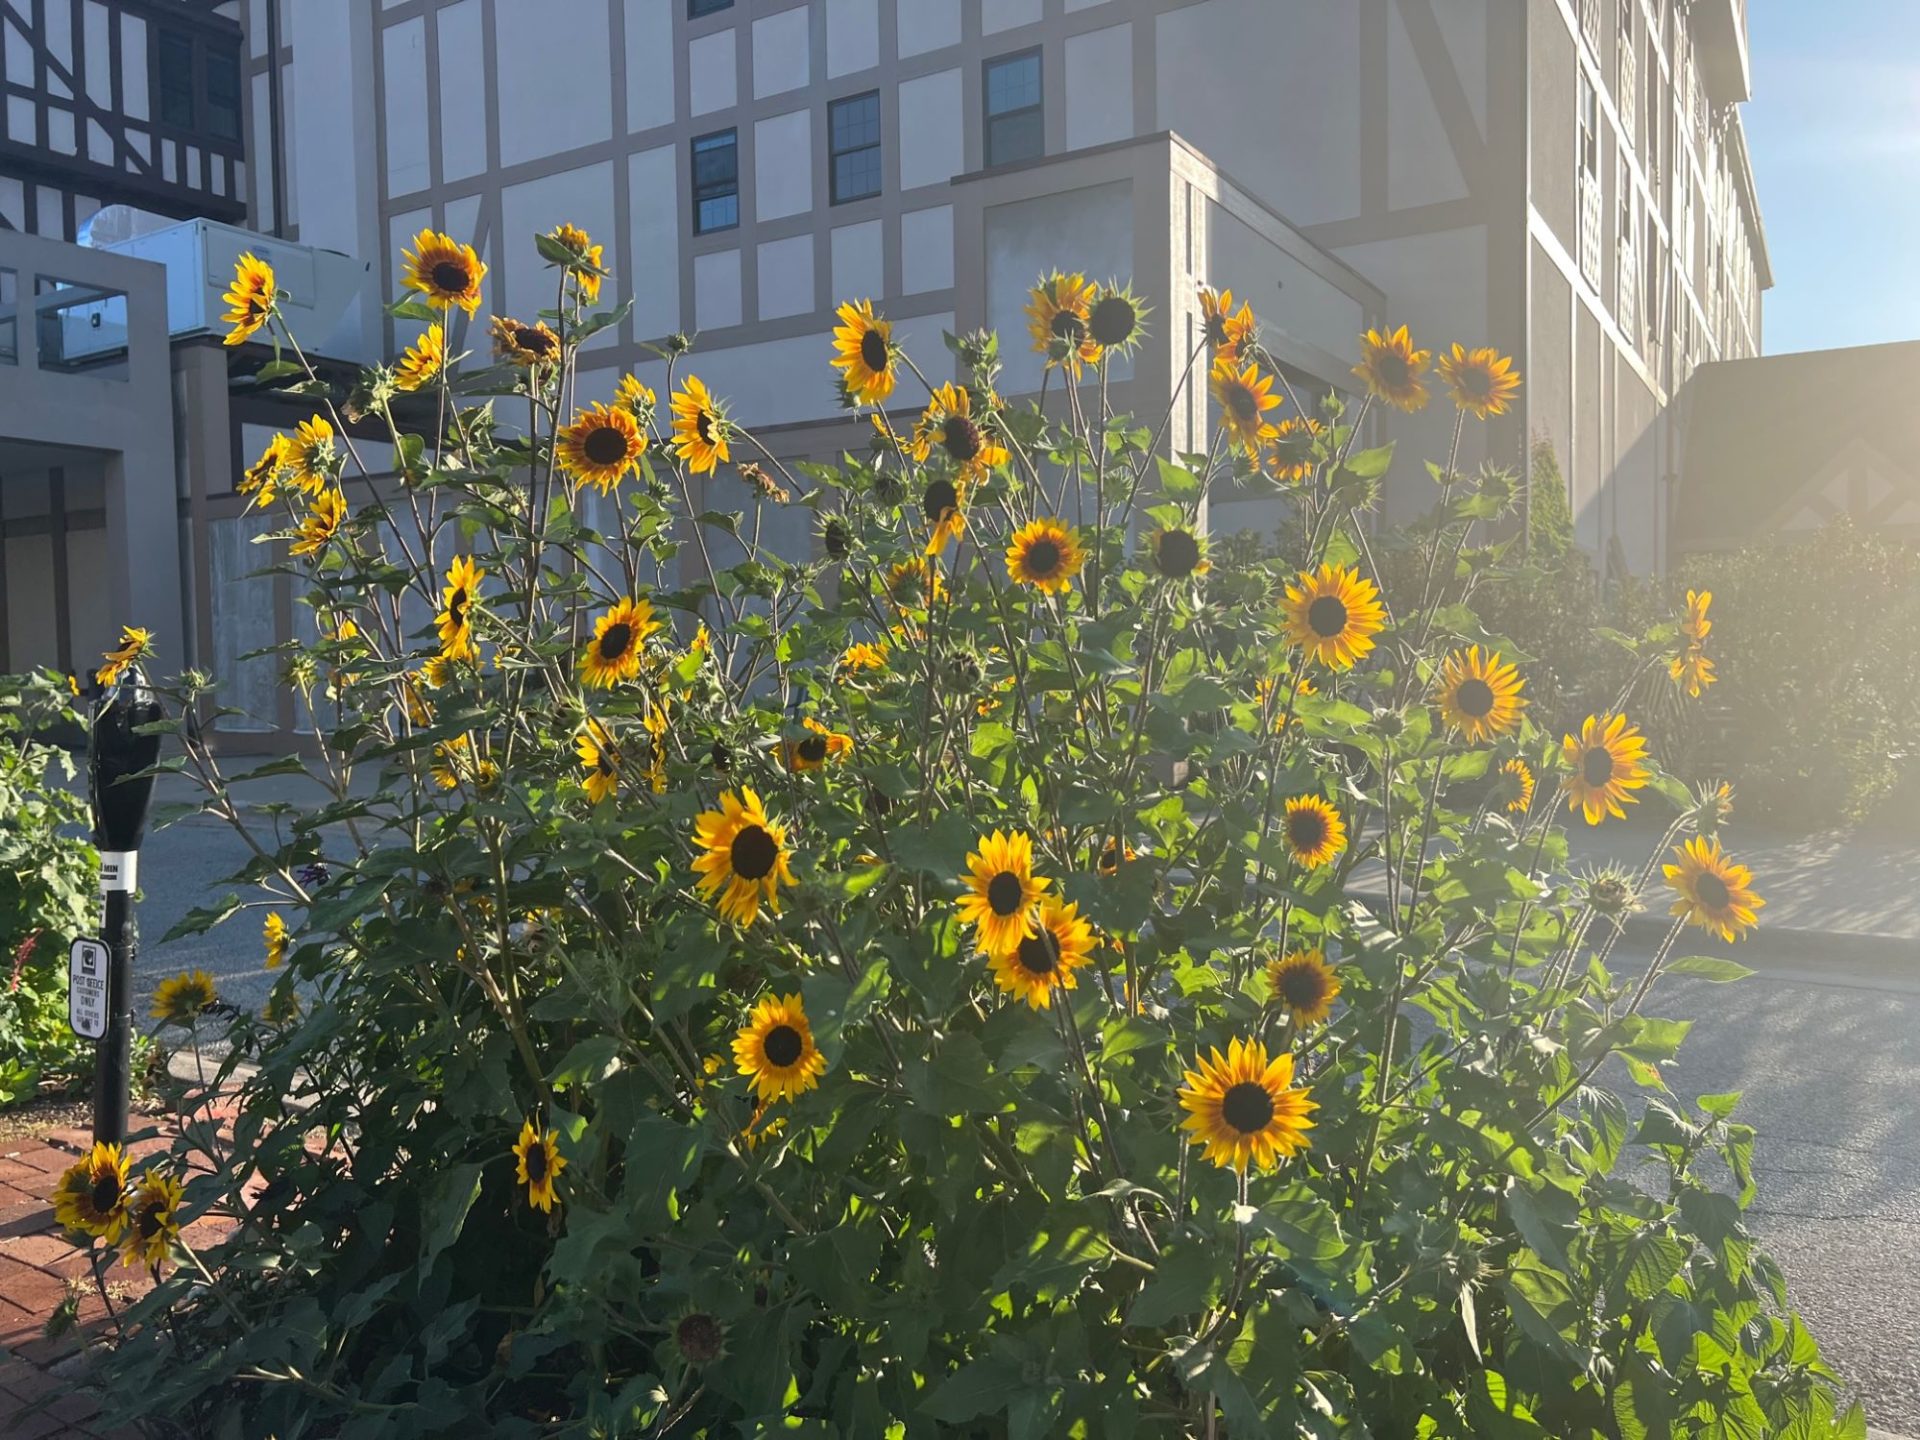 A cluster of sunflowers with a tudor style building in the background.